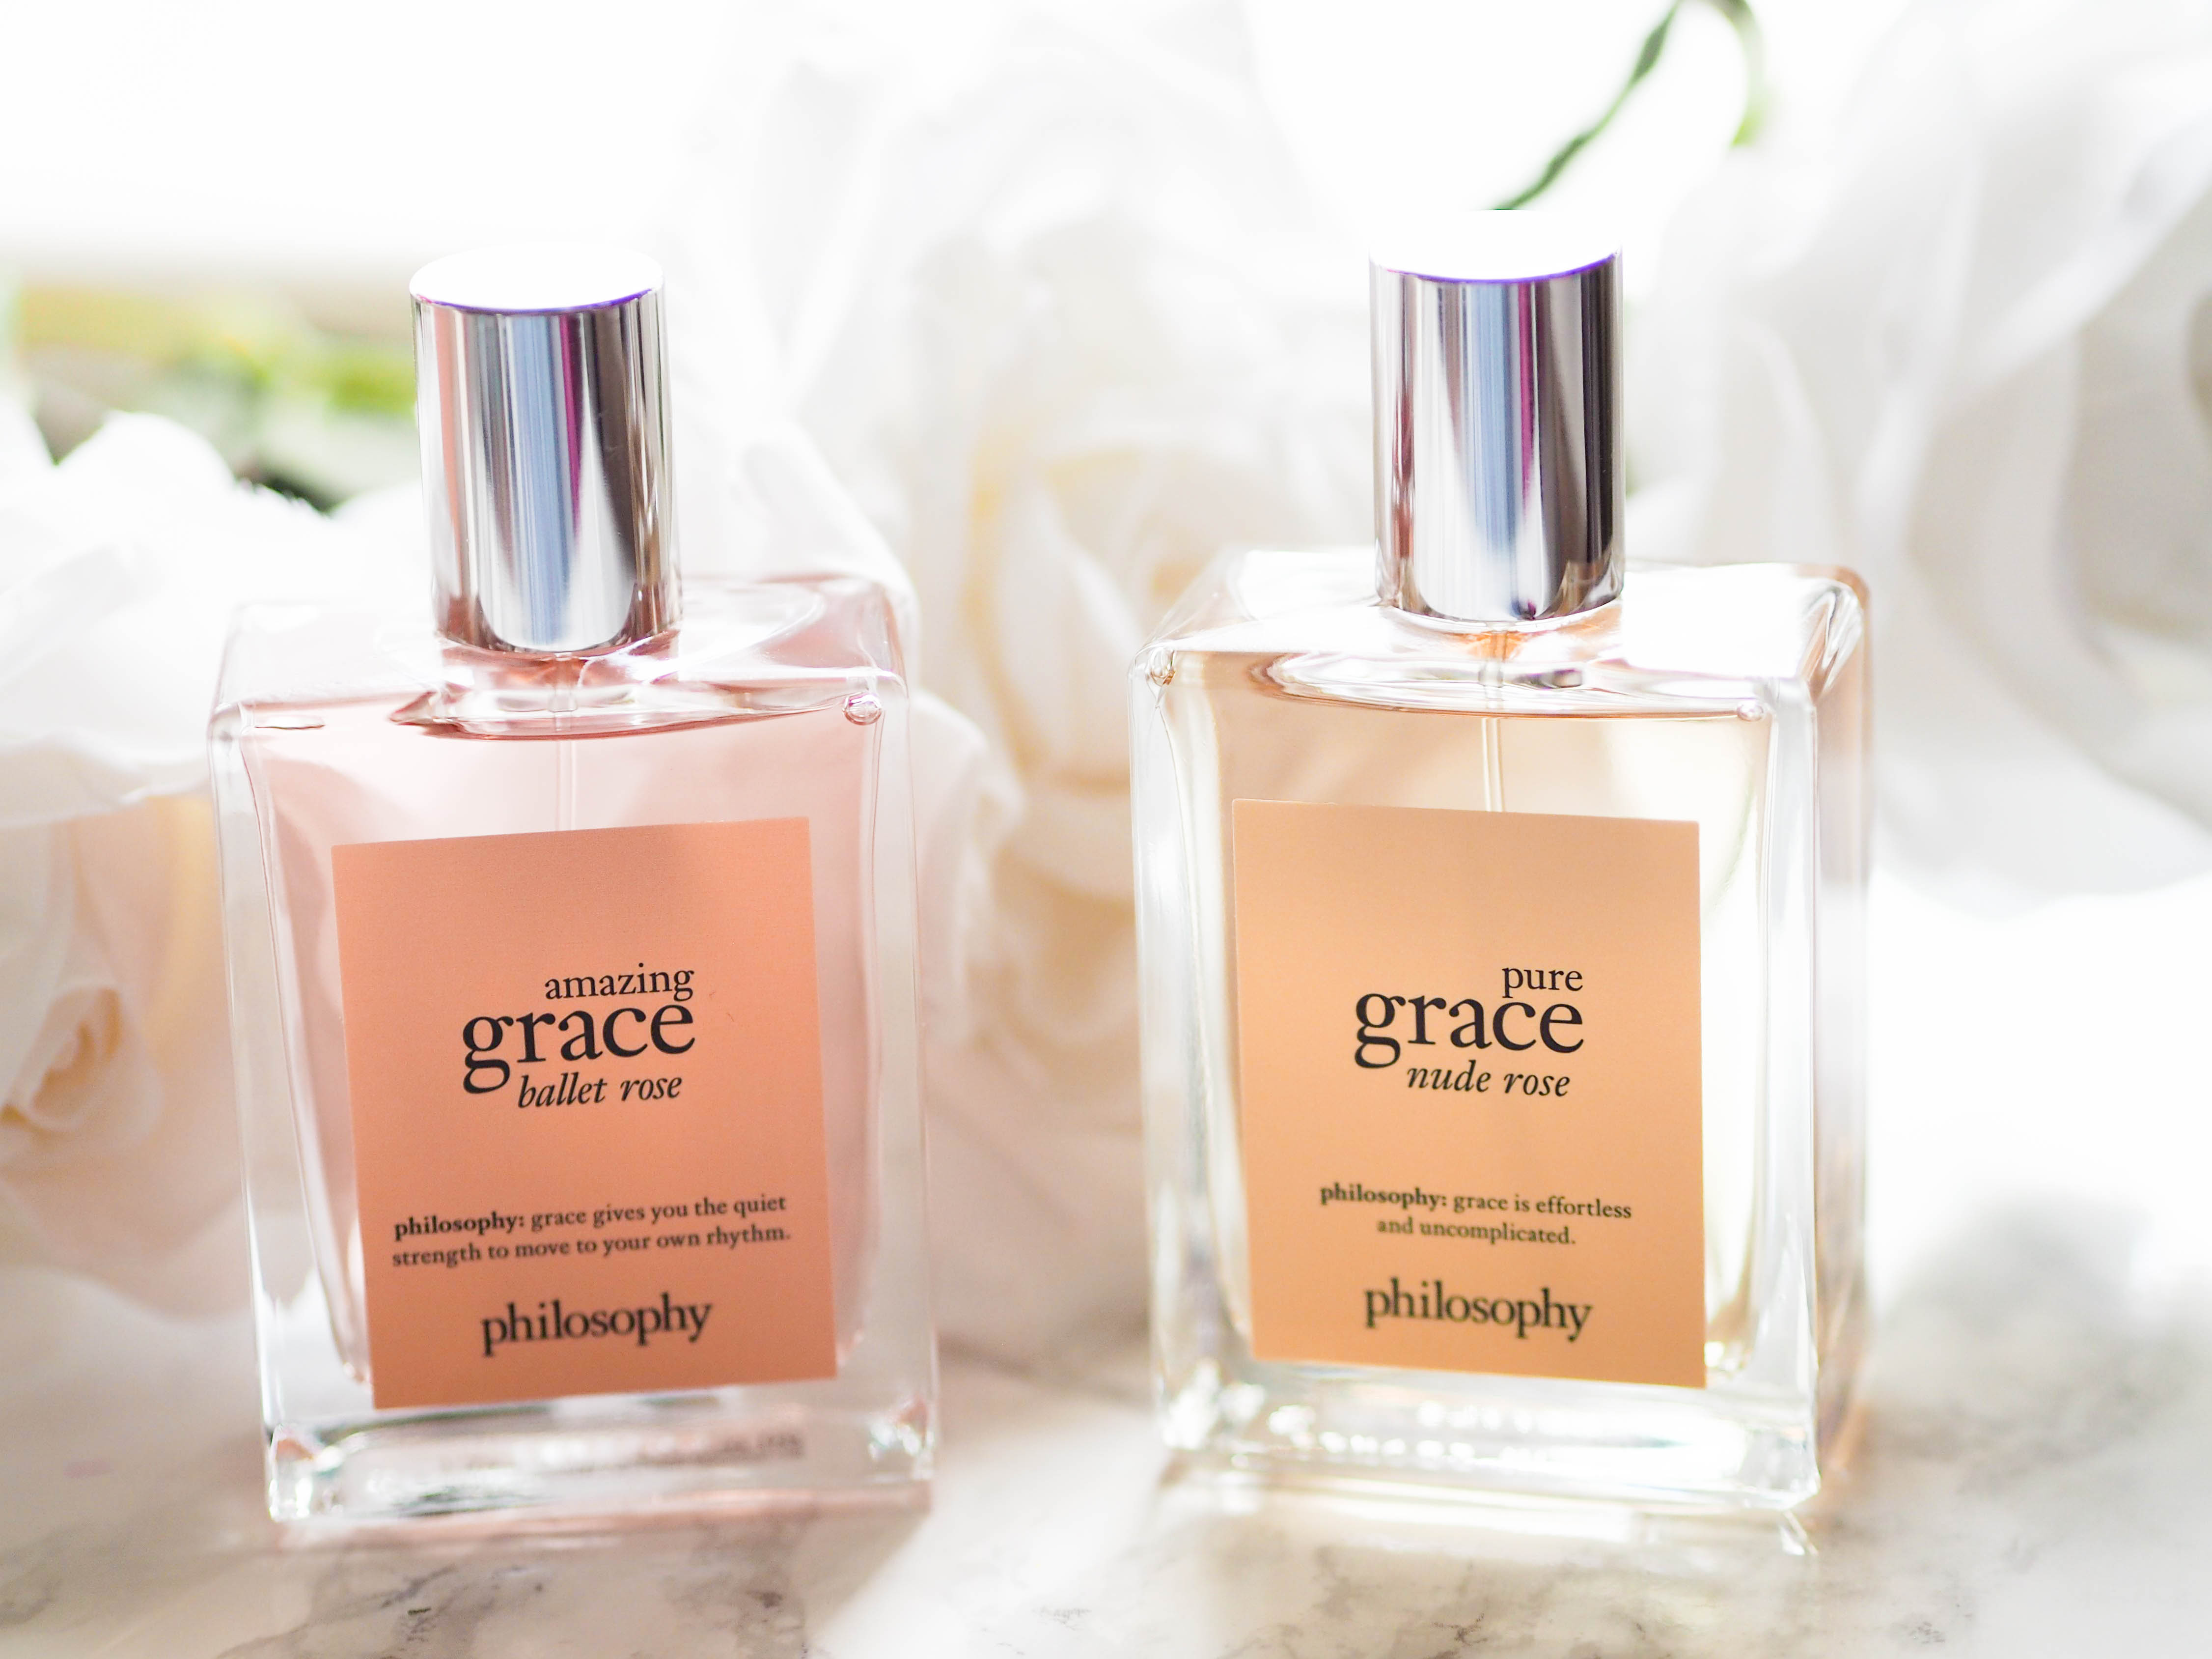 Philosophy Pure Grace Nude Rose and Amazing Grace Ballet Rose - Beauty Geek  UK